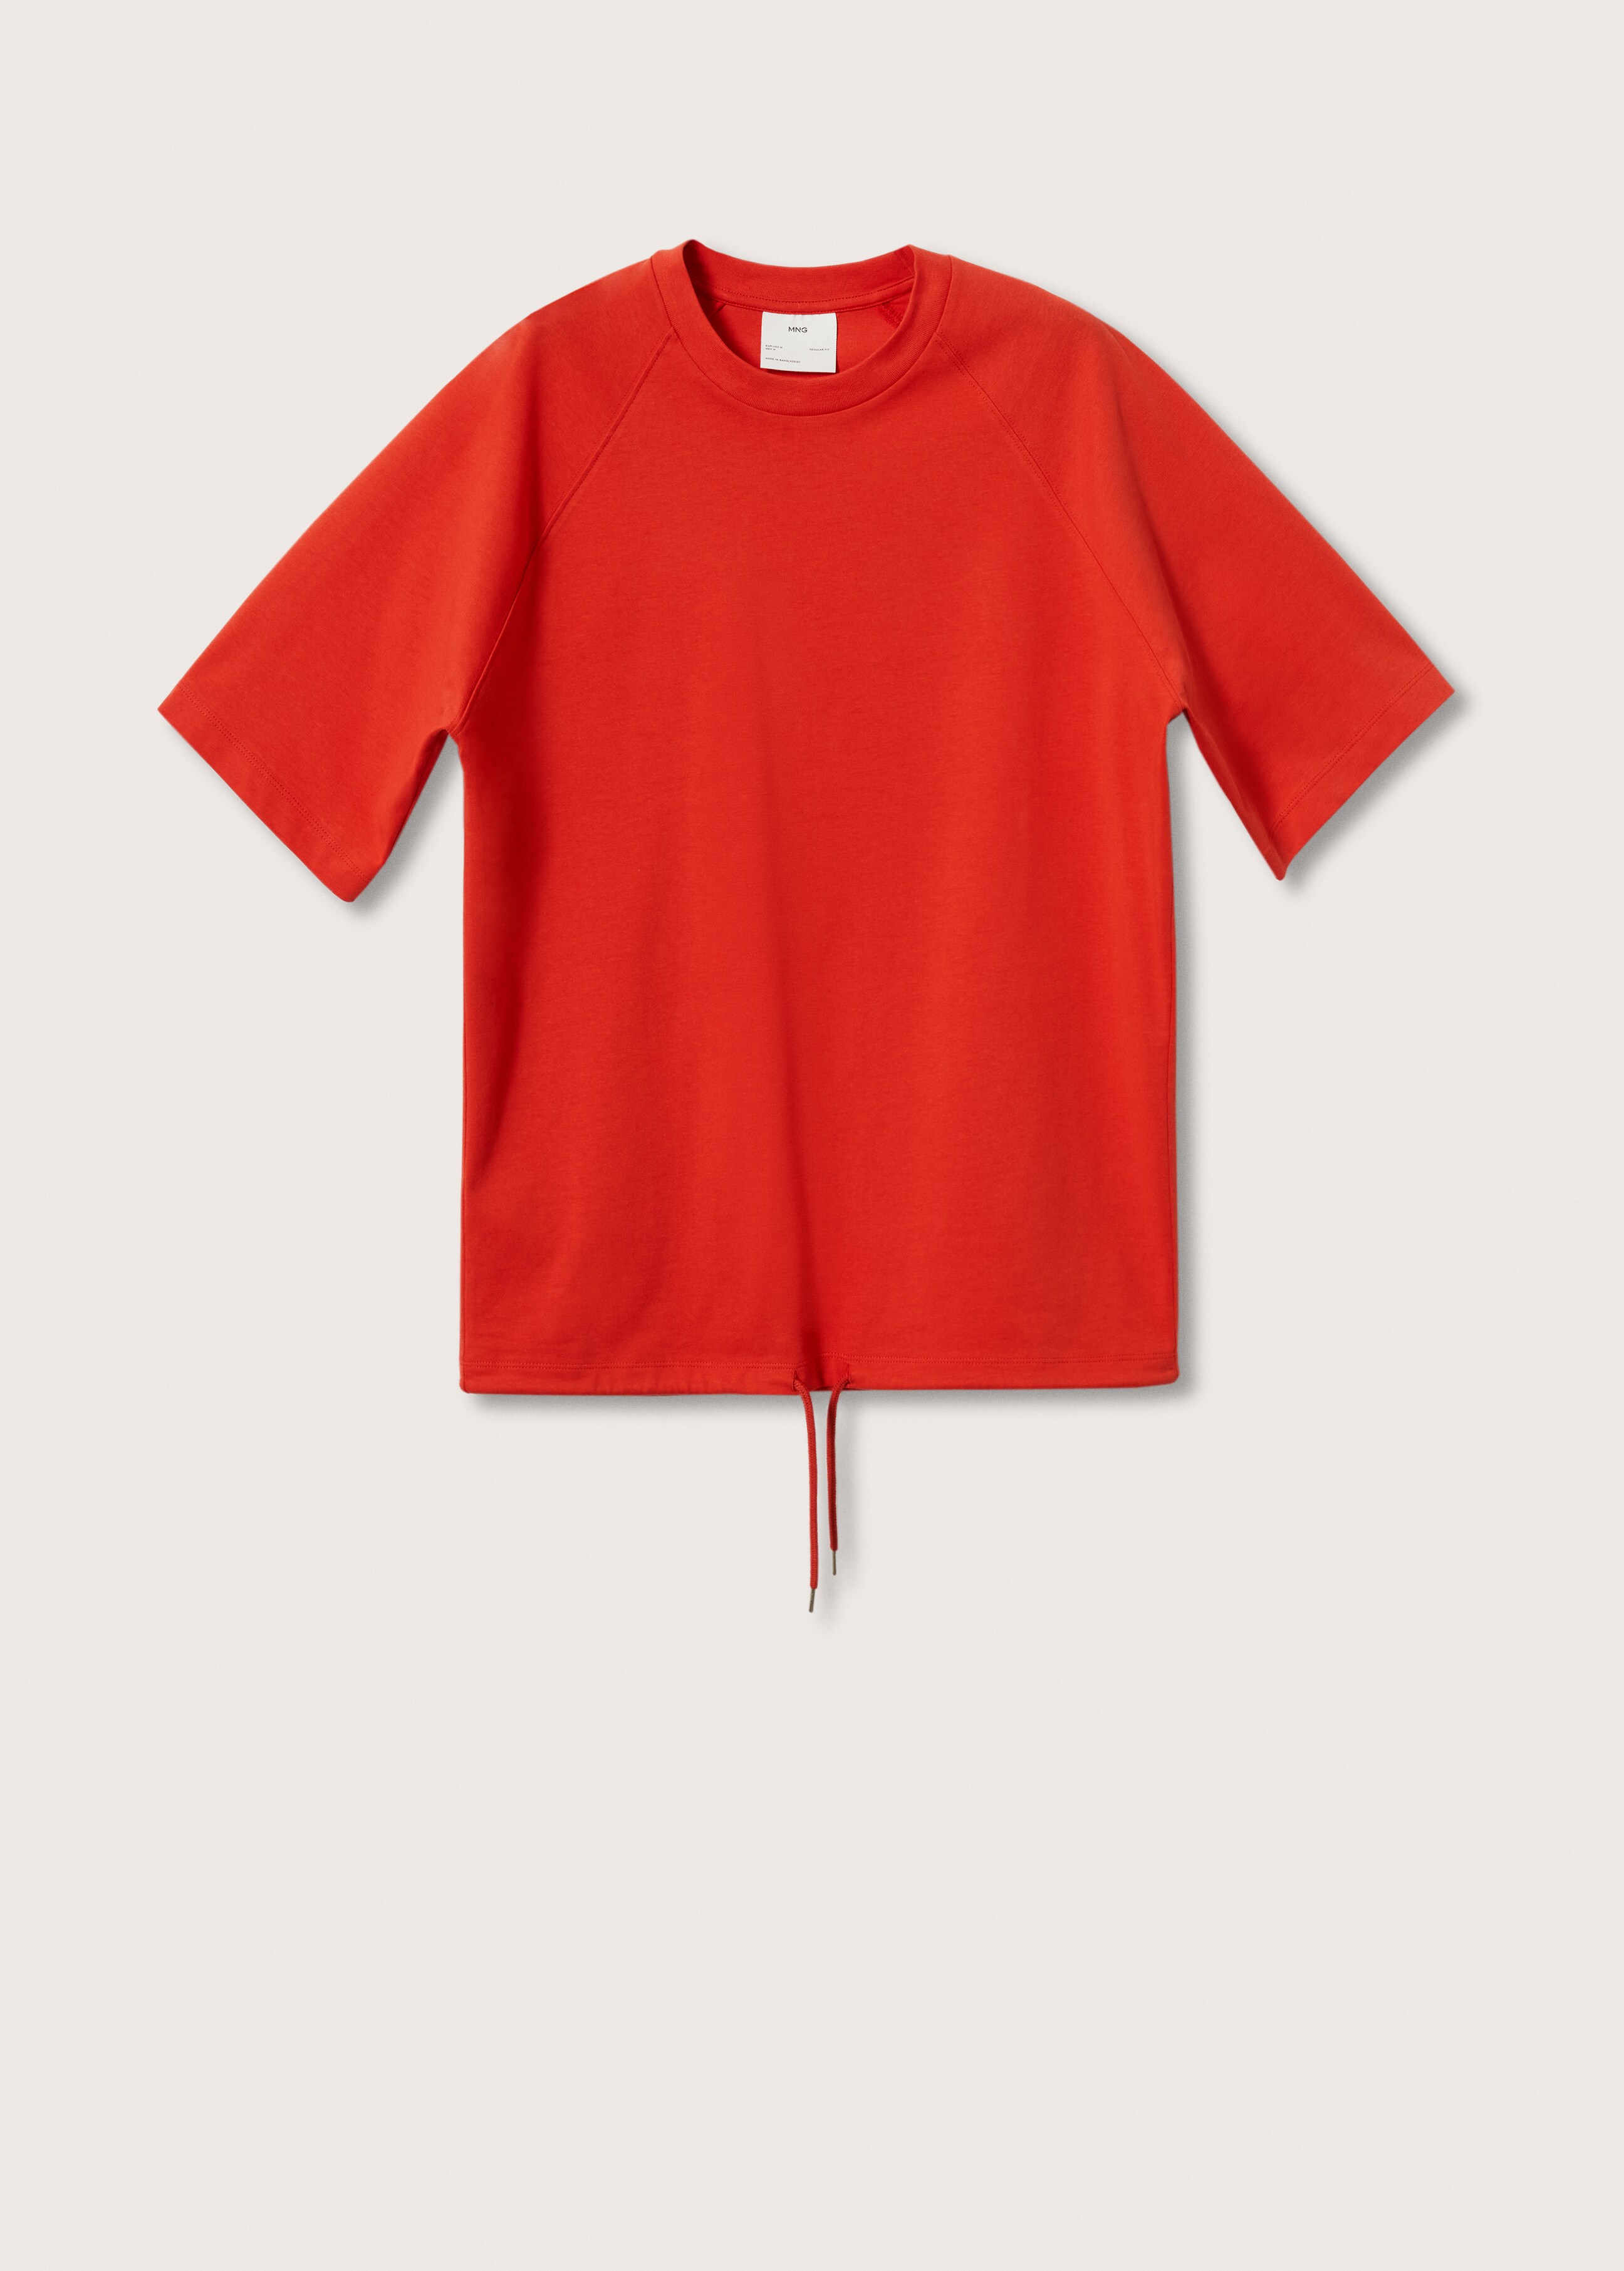 Drawstring cotton t-shirt - Article without model